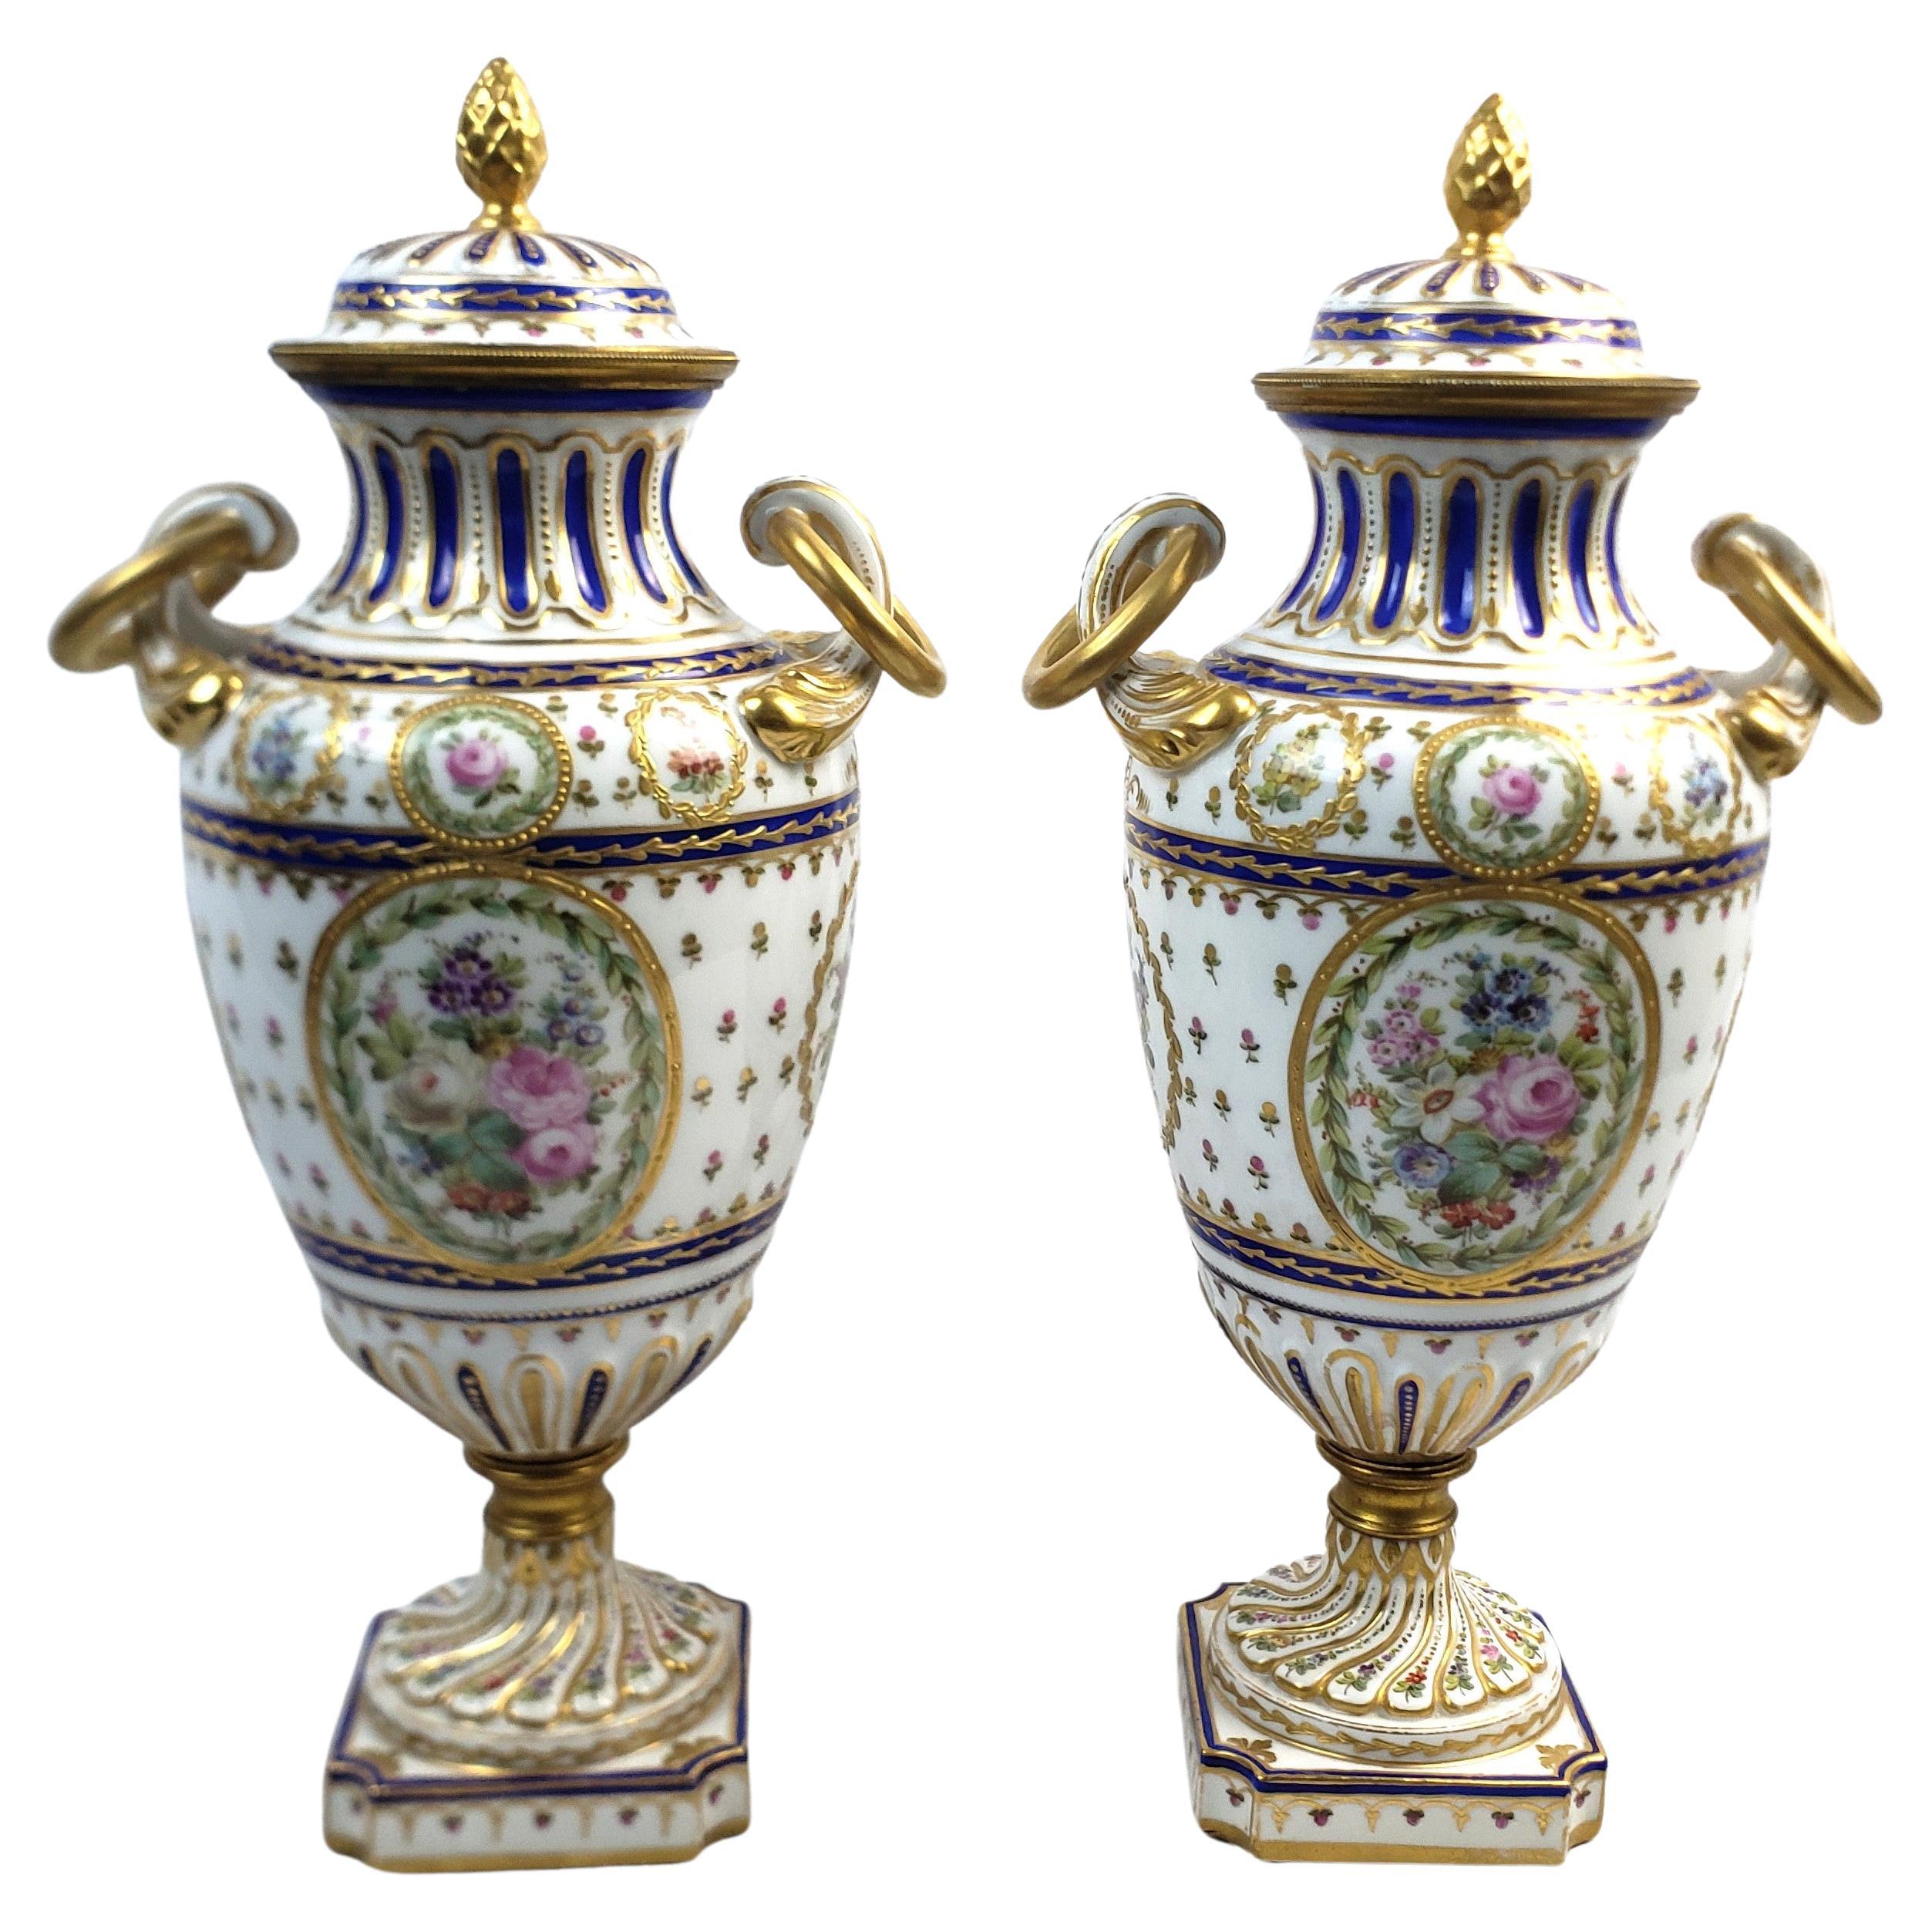 Pair of Antique Sevres Styled Covered Urns with Ornate Hand-Painted Decoration For Sale